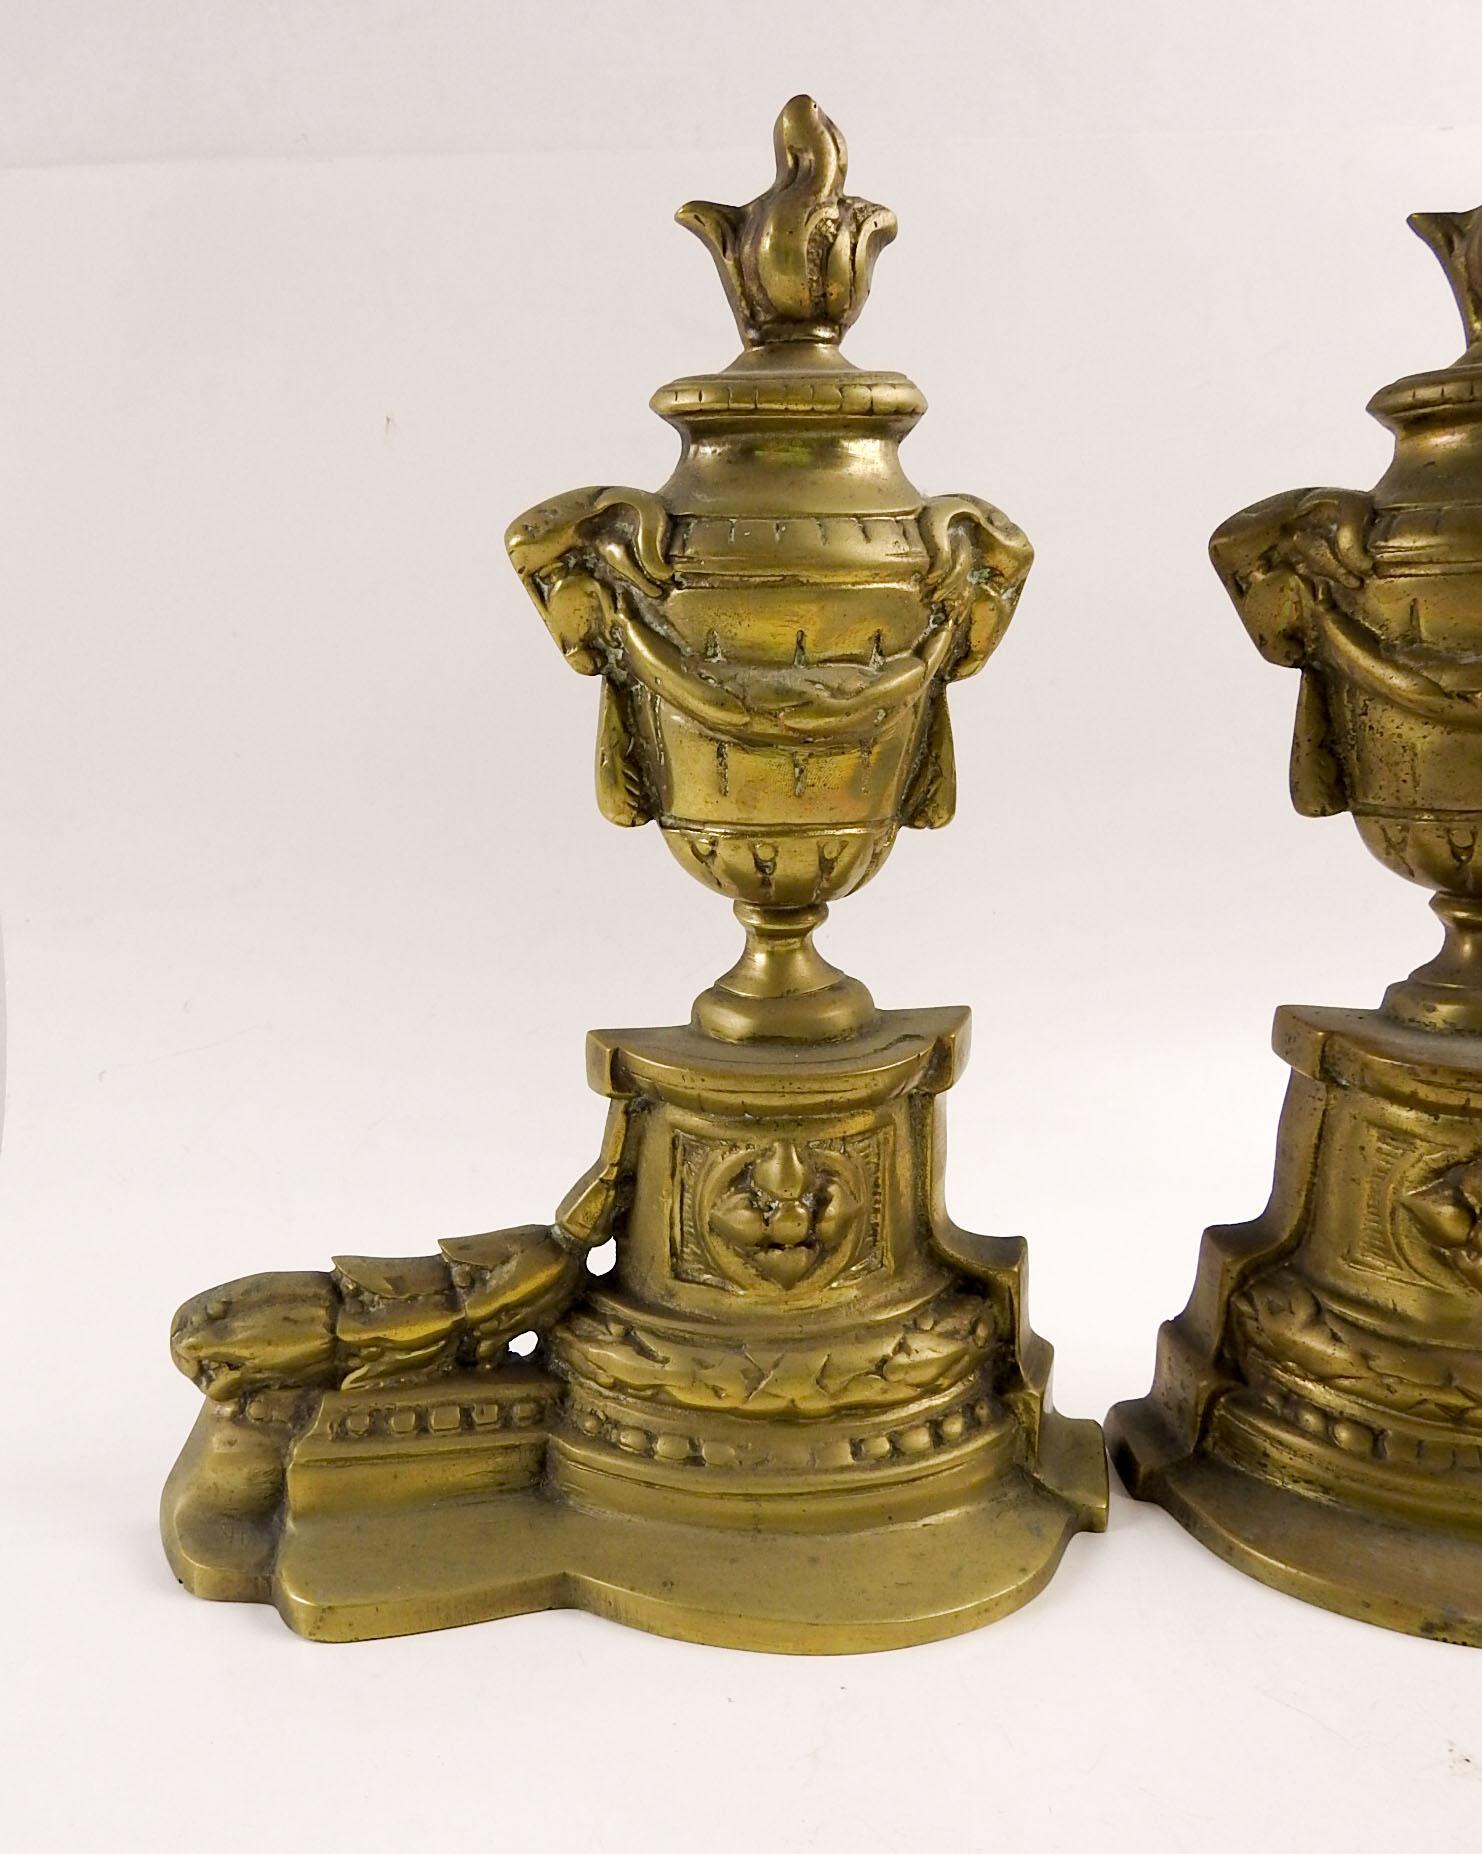 Neoclassical Revival Mid 20th Century Italian Neoclassical Brass Chenets Andirons - a Pair For Sale